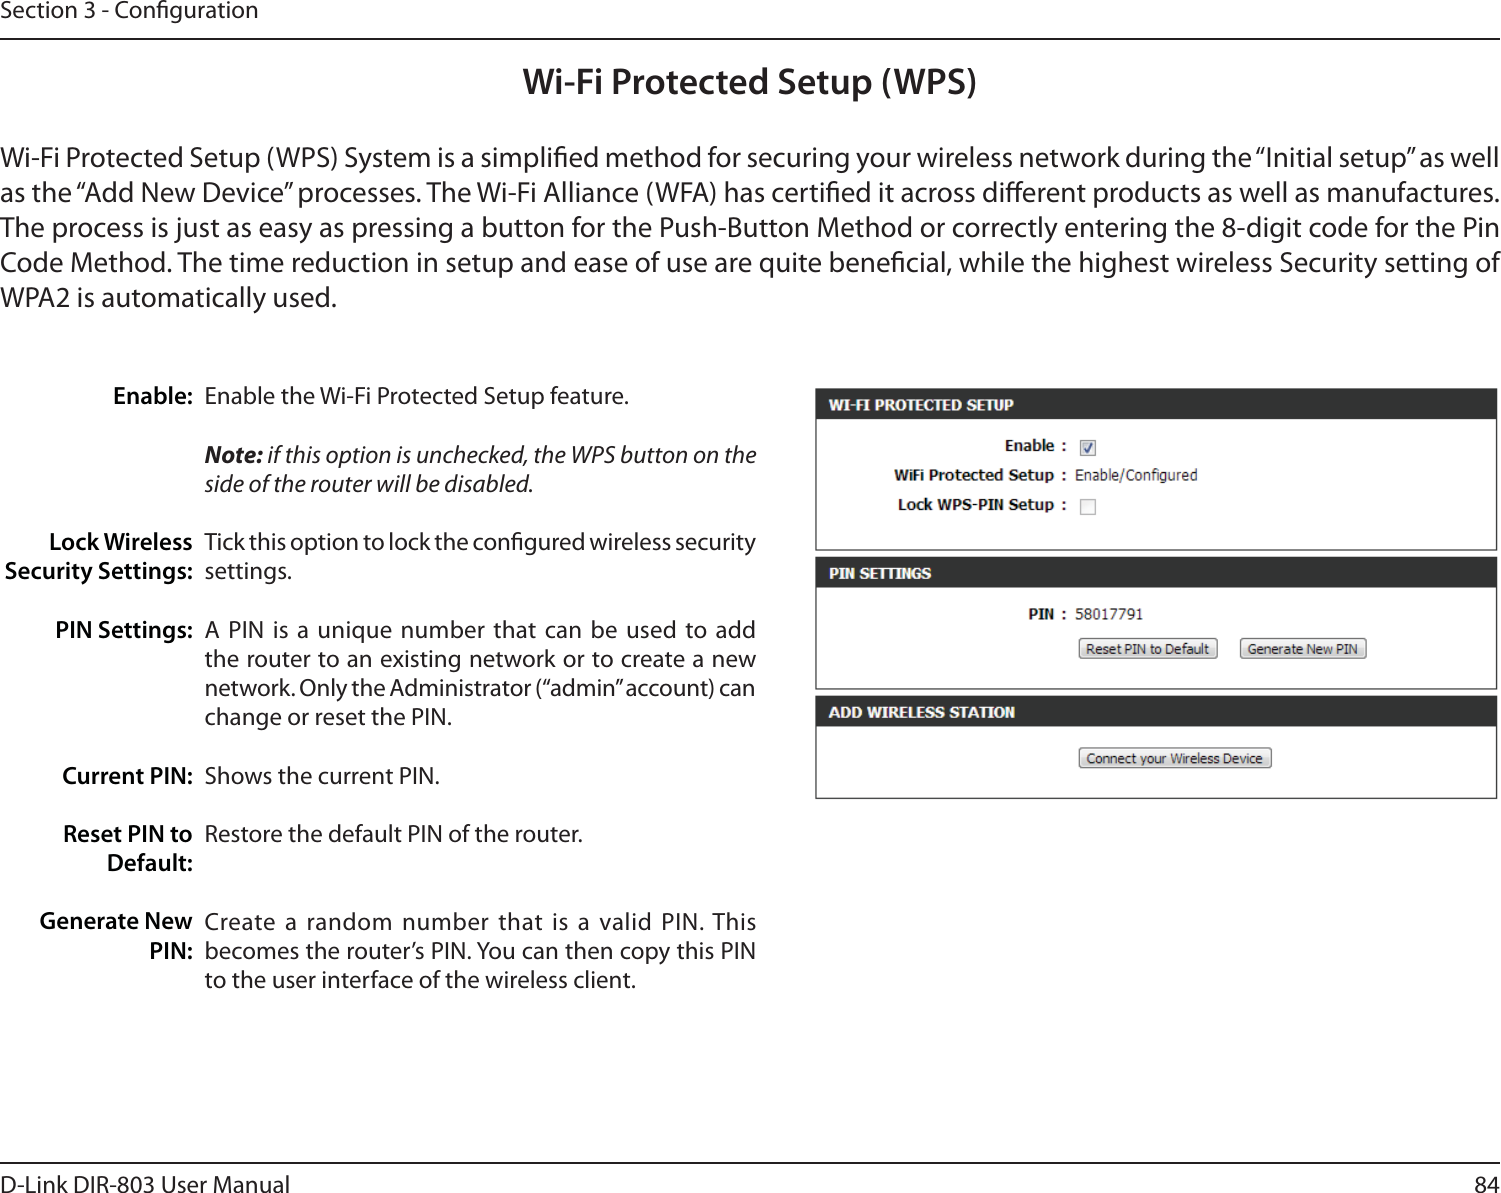 84D-Link DIR-803 User ManualSection 3 - CongurationWi-Fi Protected Setup (WPS)Enable the Wi-Fi Protected Setup feature. Note: if this option is unchecked, the WPS button on the side of the router will be disabled.Tick this option to lock the congured wireless security settings.A PIN is a unique number that can be used to add the router to an existing network or to create a new network. Only the Administrator (“admin” account) can change or reset the PIN. Shows the current PIN. Restore the default PIN of the router. Create a random number that is a valid PIN. This becomes the router’s PIN. You can then copy this PIN to the user interface of the wireless client.Enable:Lock Wireless Security Settings:PIN Settings:Current PIN:Reset PIN to Default:Generate New PIN:Wi-Fi Protected Setup (WPS) System is a simplied method for securing your wireless network during the “Initial setup” as well as the “Add New Device” processes. The Wi-Fi Alliance (WFA) has certied it across dierent products as well as manufactures. The process is just as easy as pressing a button for the Push-Button Method or correctly entering the 8-digit code for the Pin Code Method. The time reduction in setup and ease of use are quite benecial, while the highest wireless Security setting of WPA2 is automatically used.